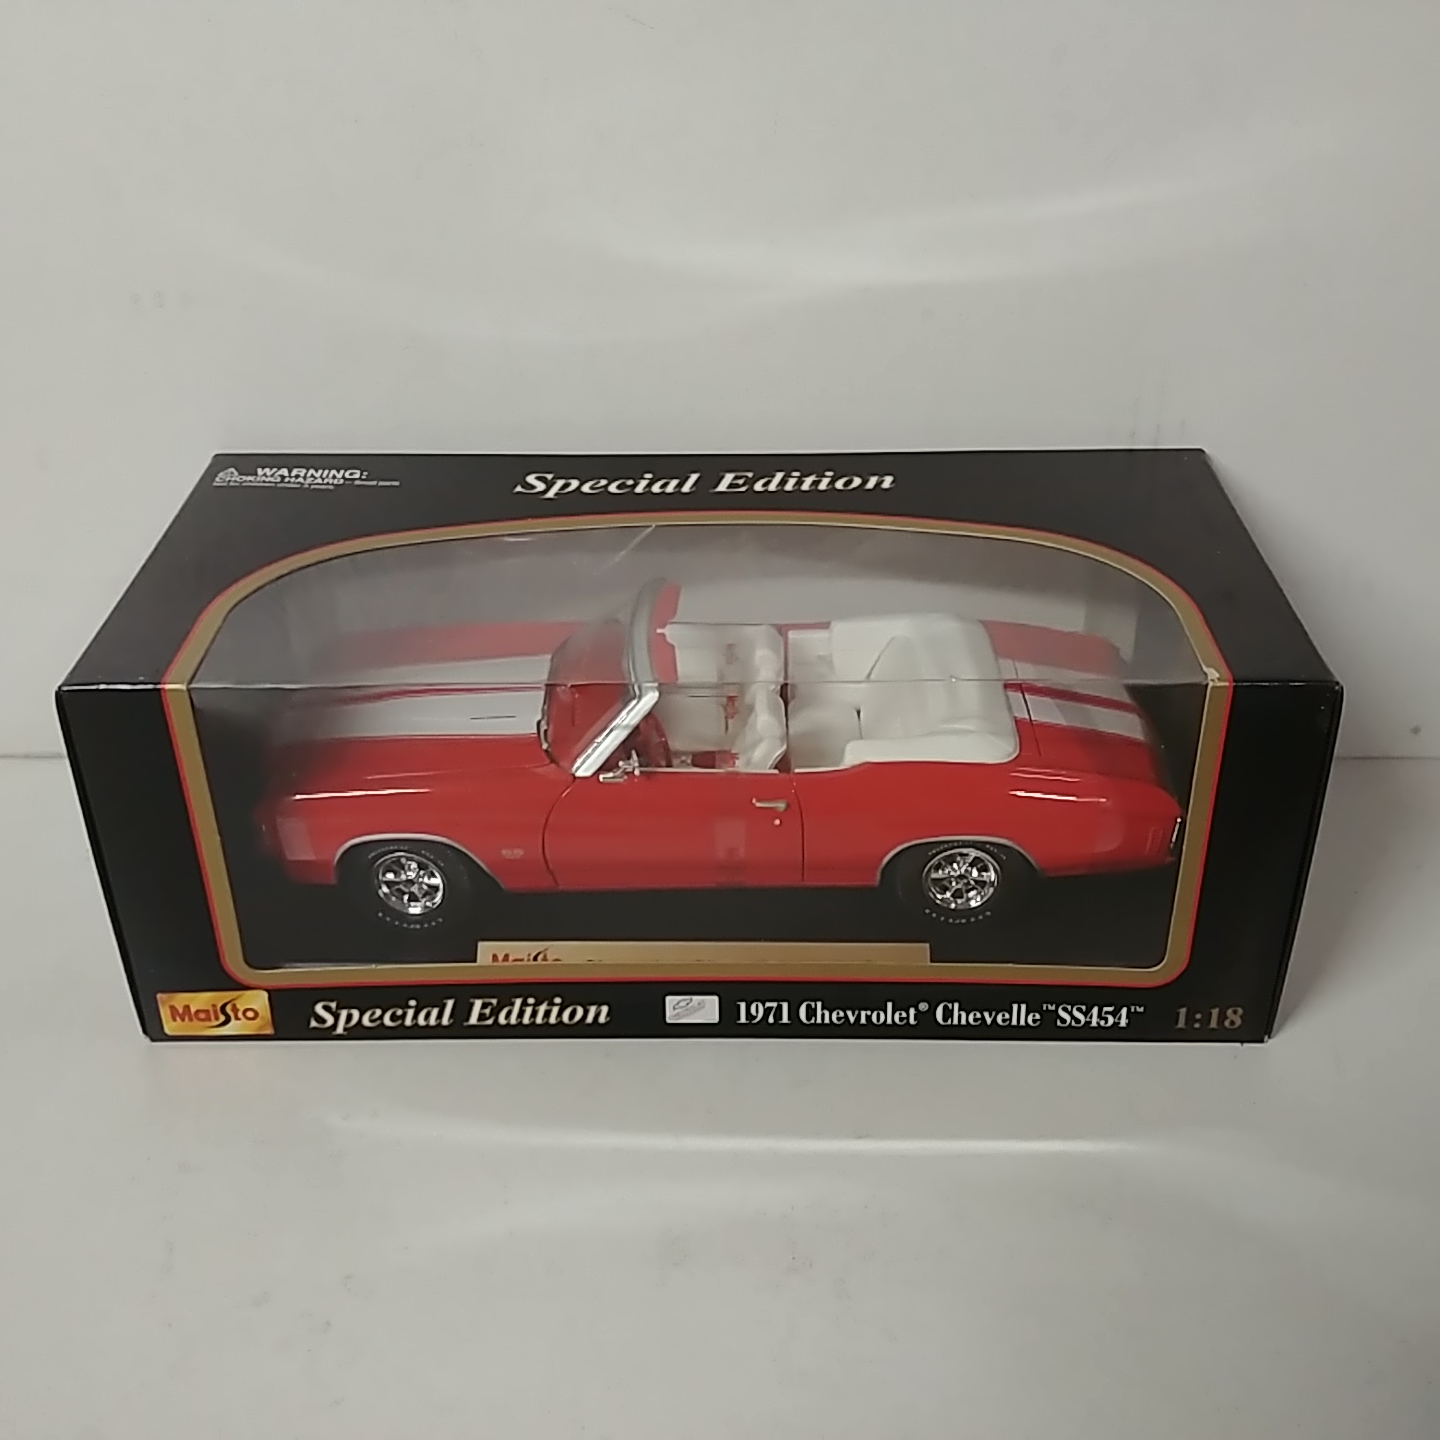 1971 Chevrolet 1/18th Chevelle SS 454 Convertible Red